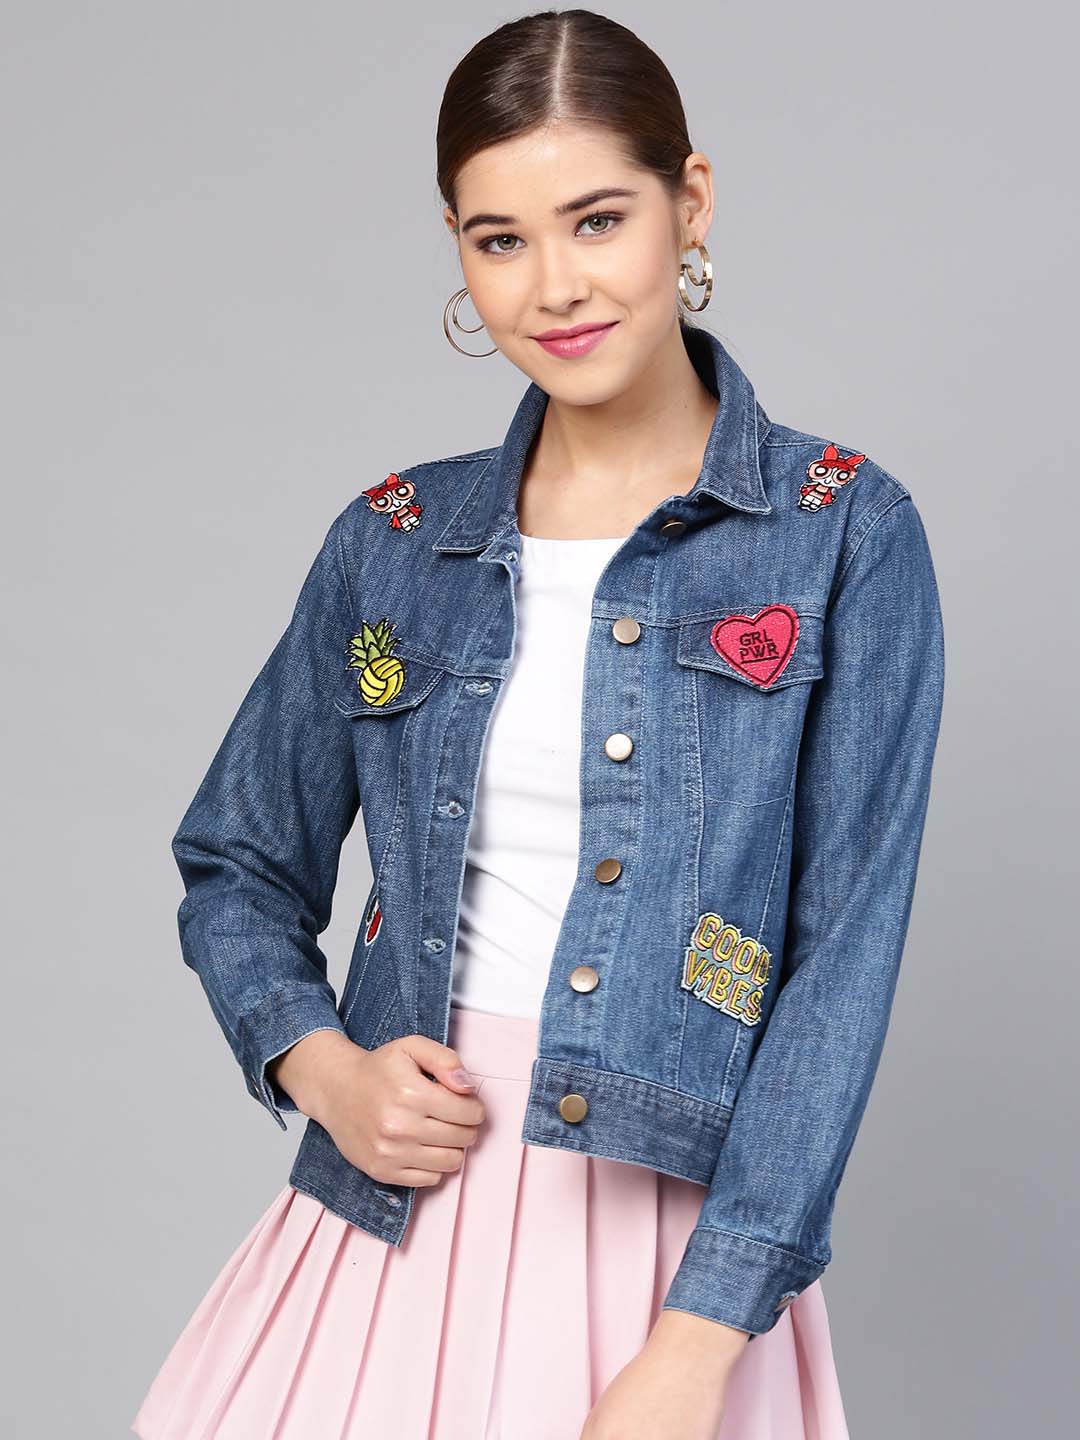 Fashion People Love This Basic Jacket—Here Are 9 Cool Ways to Style It Now  | Black denim jacket outfit, Denim jacket outfit, Oversized jacket outfit